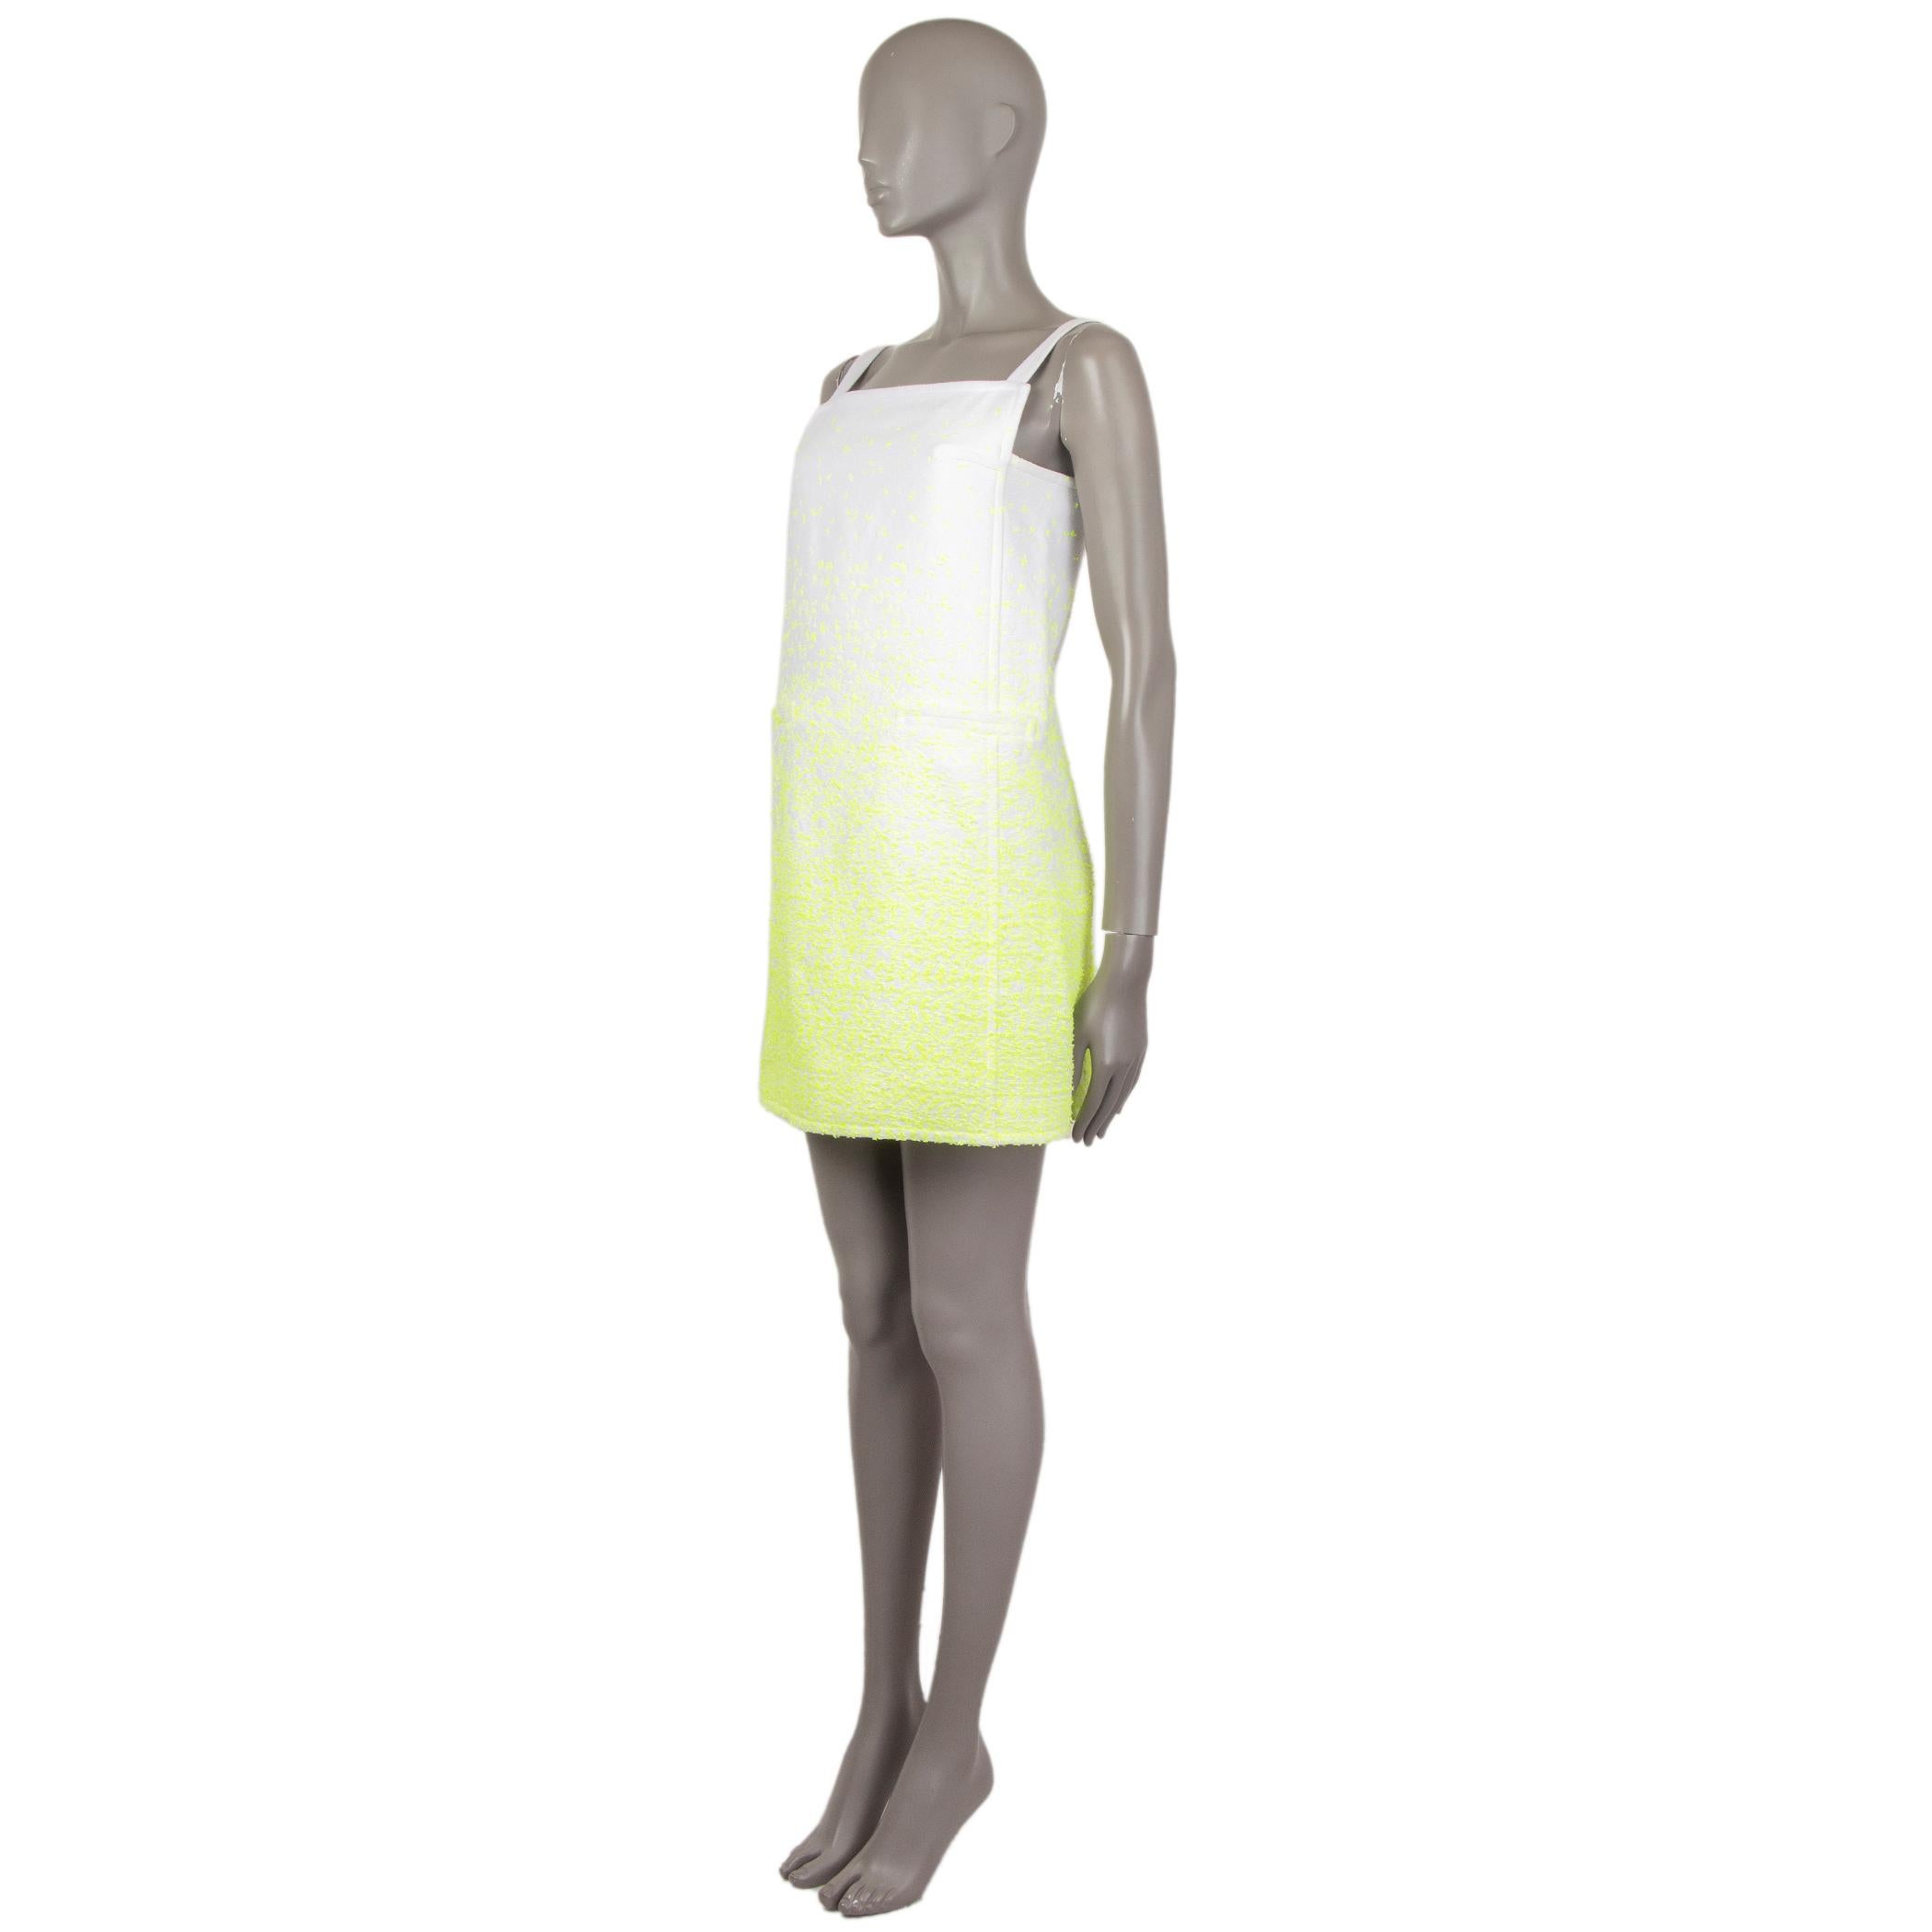 100% authentic Courreges textured pinafore dress in white and neon yellow cotton (32%), paper (32%), acrylic (28%), and nylon (8%). With two pockets on the front. Closes with invisible zipper on the side. Lined in white fabric. Has been worn and is